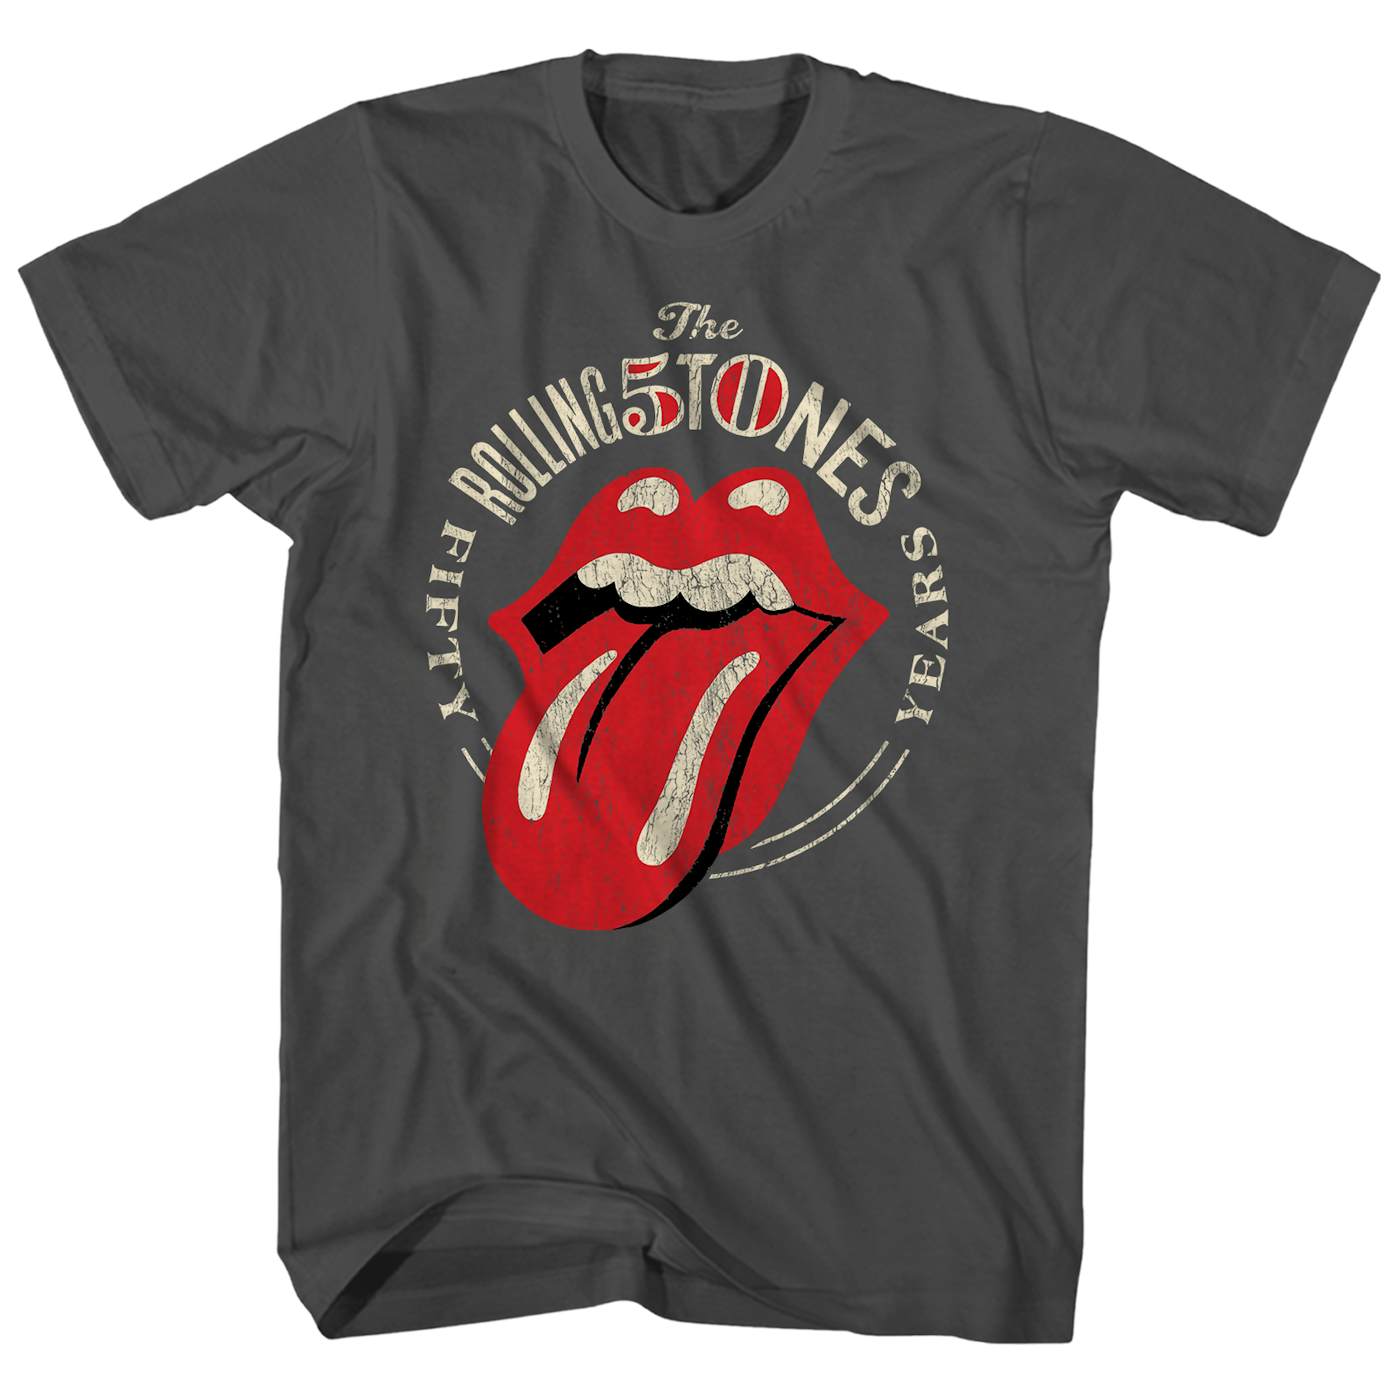 The Rolling Stones T-Shirt  50 Year Anniversary The Rolling Stones Shirt